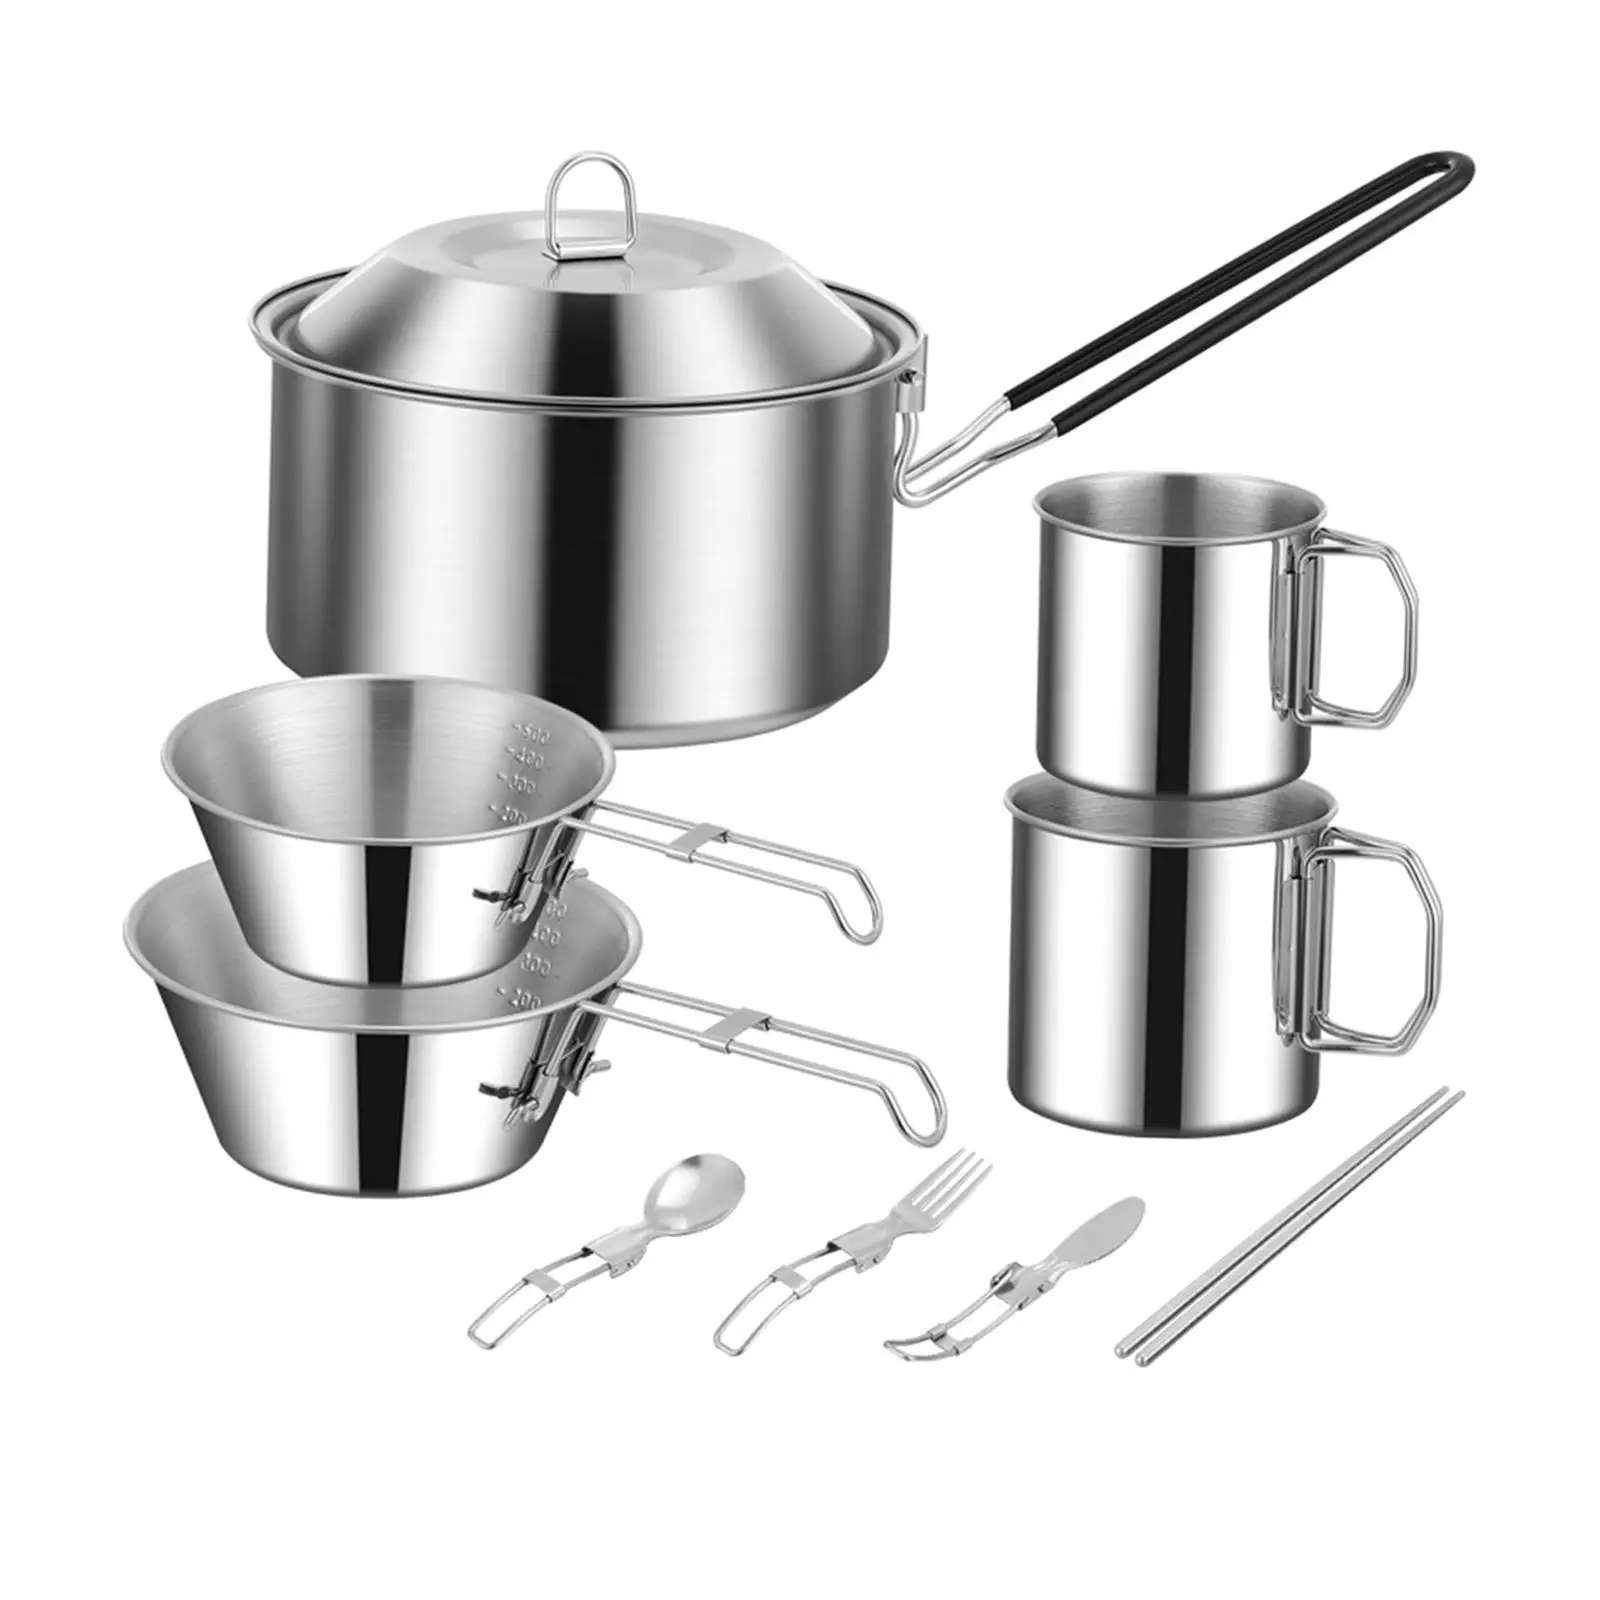 Cooking Pot Set Camping with Lid Stackable Household Accessories for Hiking